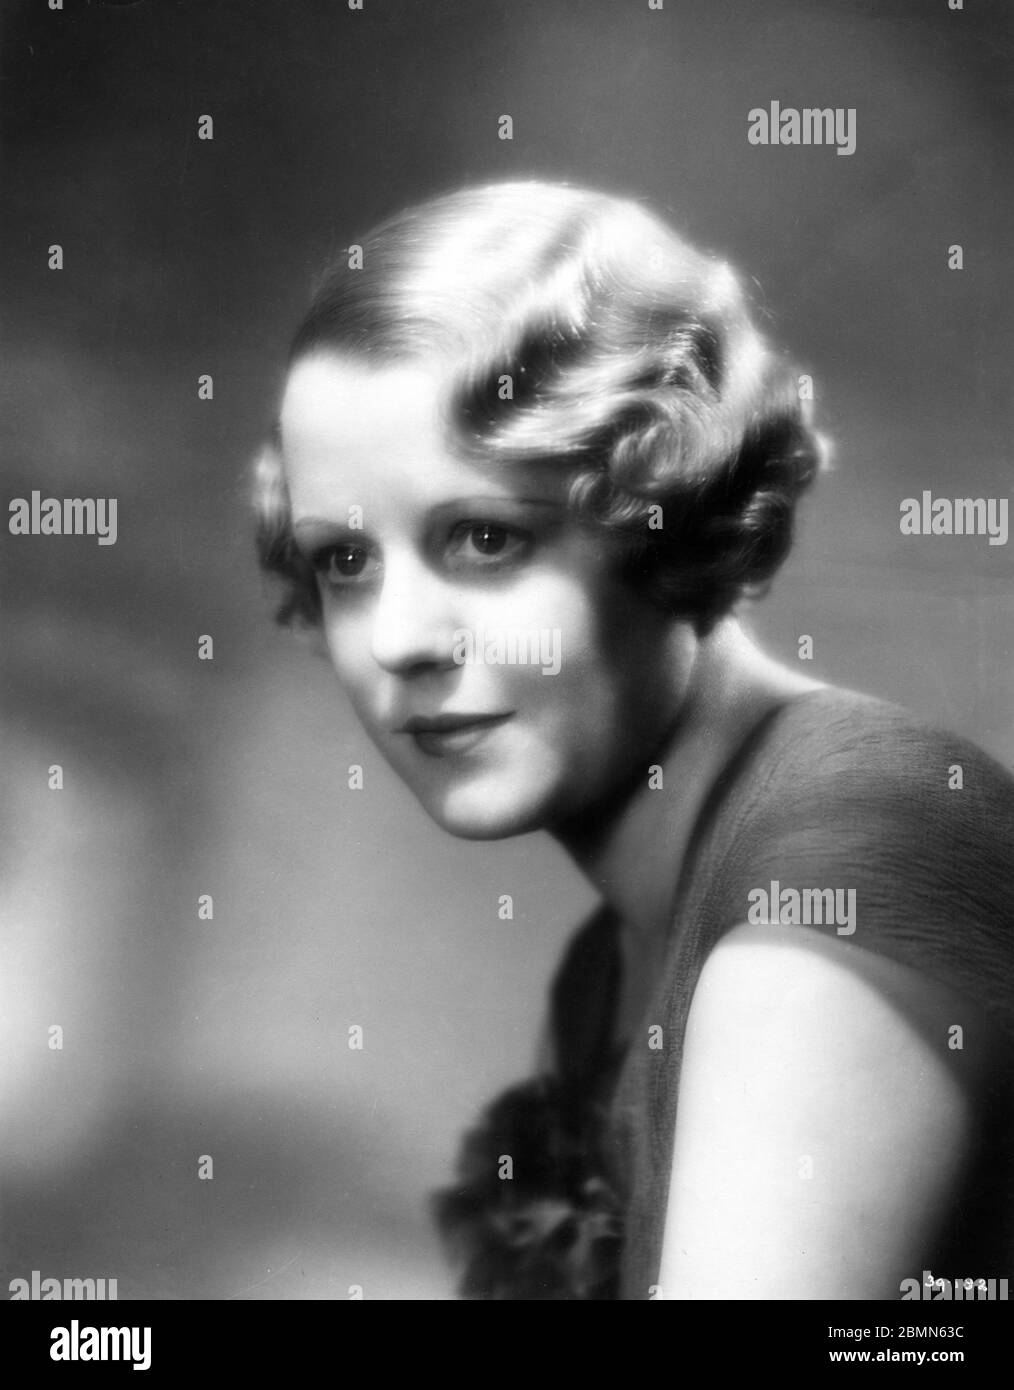 EDNA BEST Portrait as Jill Lawrence in THE MAN WHO KNEW TOO MUCH 1934 director ALFRED HITCHCOCK writers Charles Bennett and D.B. Wyndham - Lewis producer Michael Balcon Gaumont British Picture Corporation Stock Photo